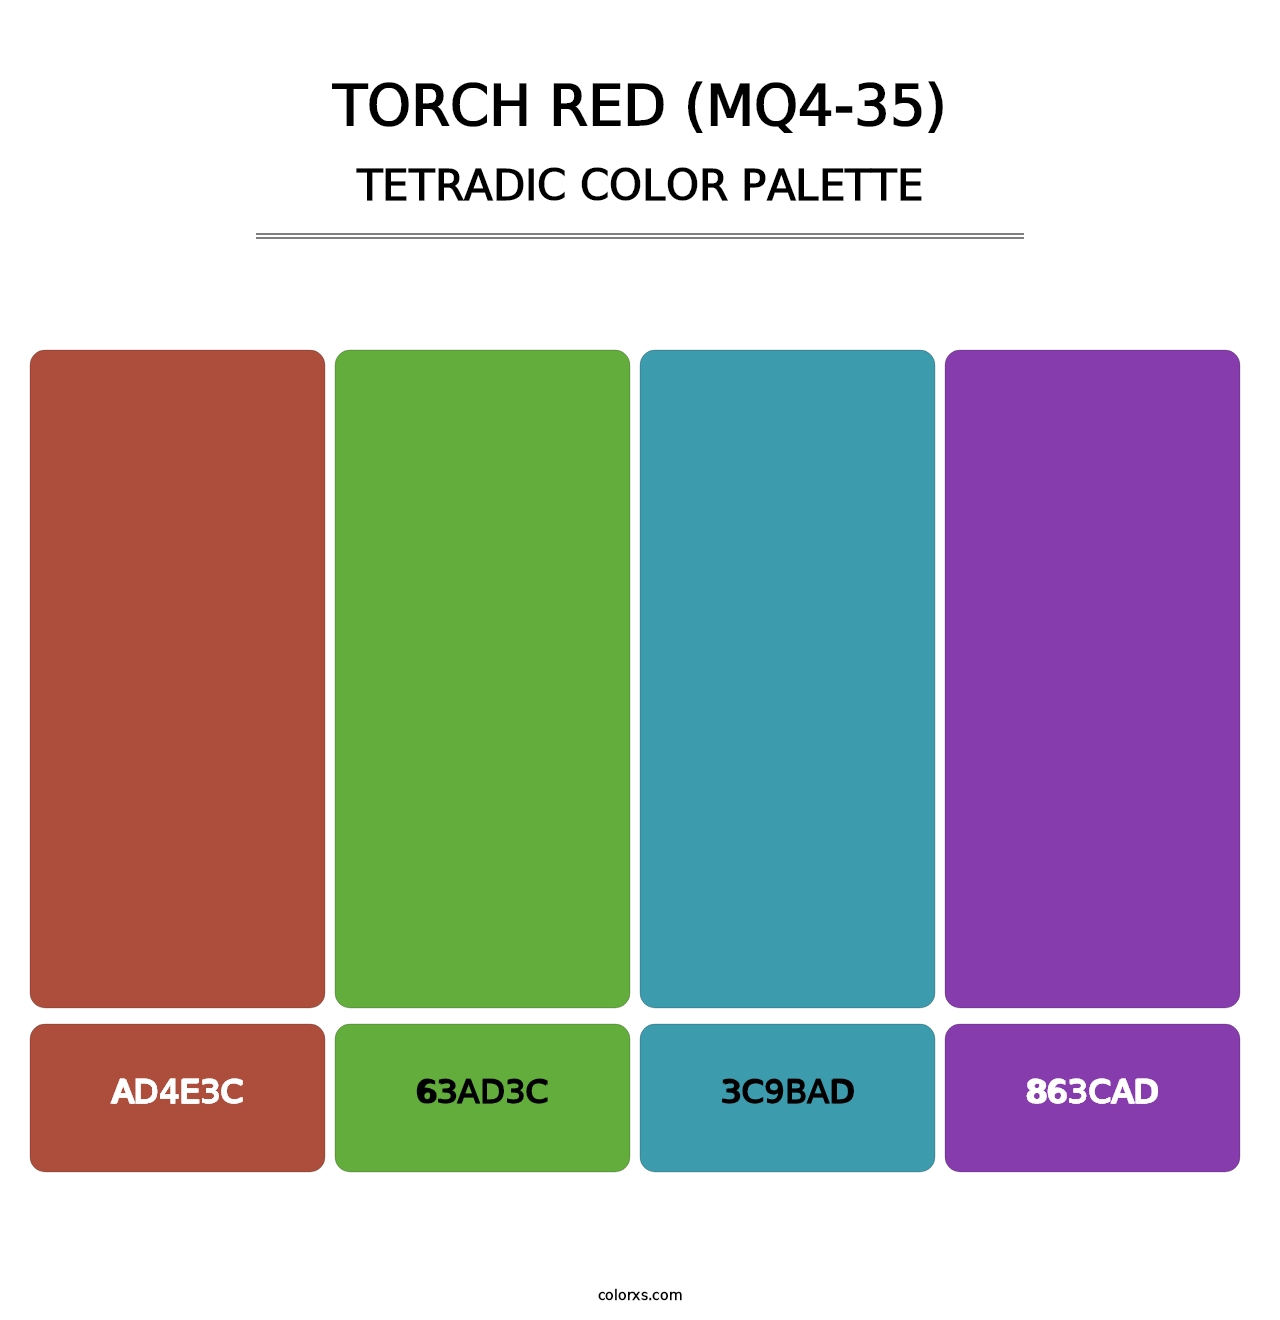 Torch Red (MQ4-35) - Tetradic Color Palette